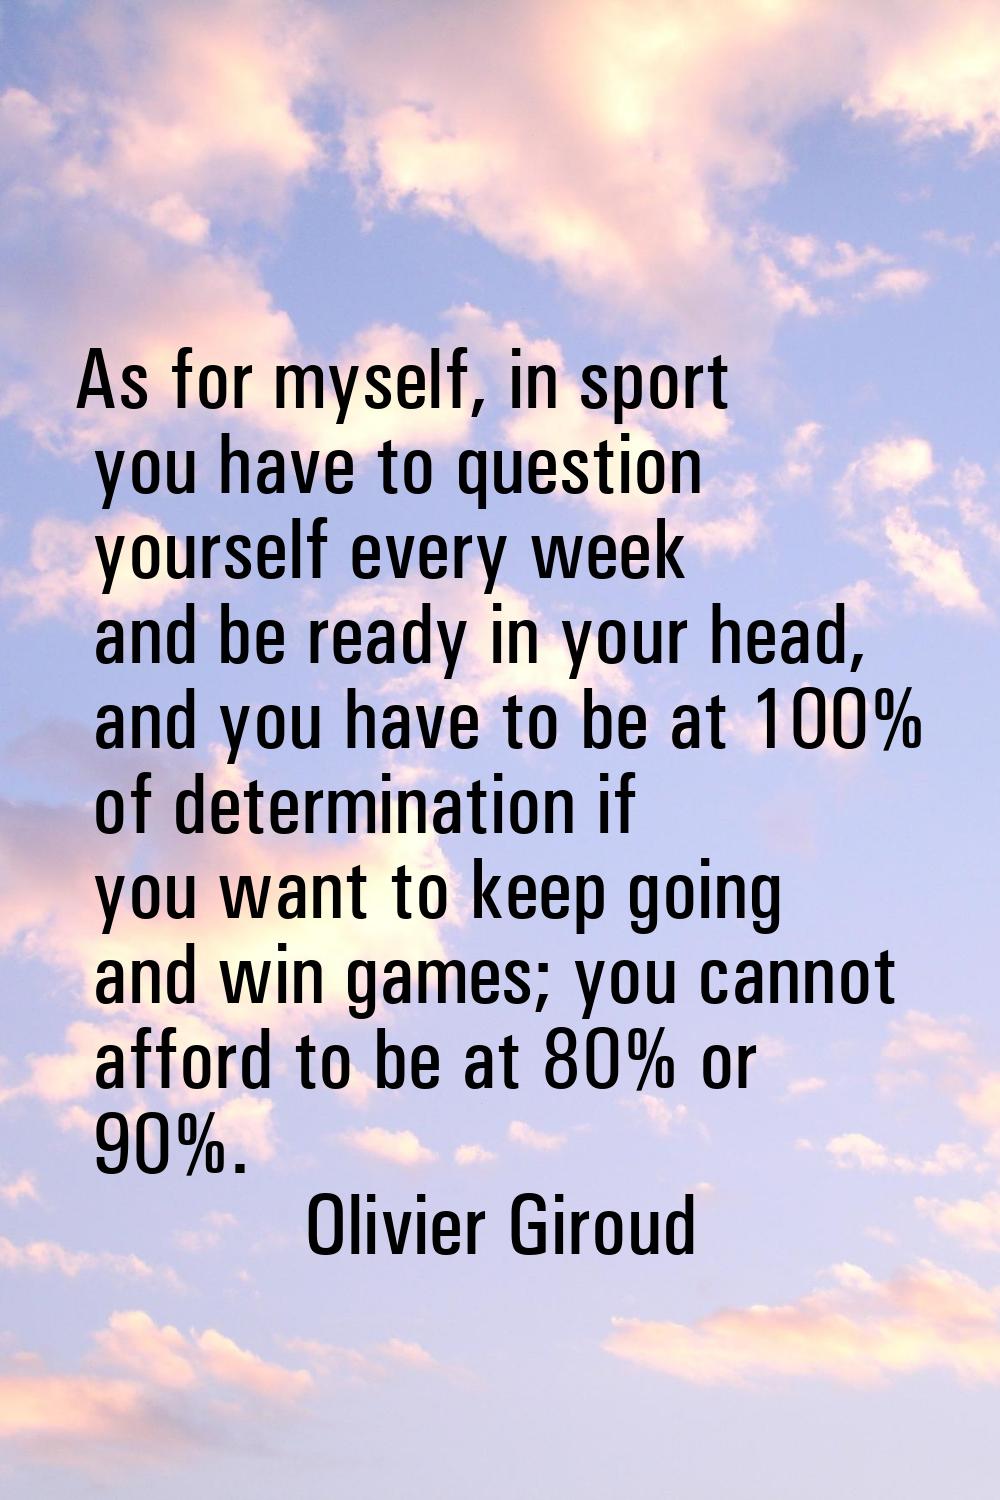 As for myself, in sport you have to question yourself every week and be ready in your head, and you